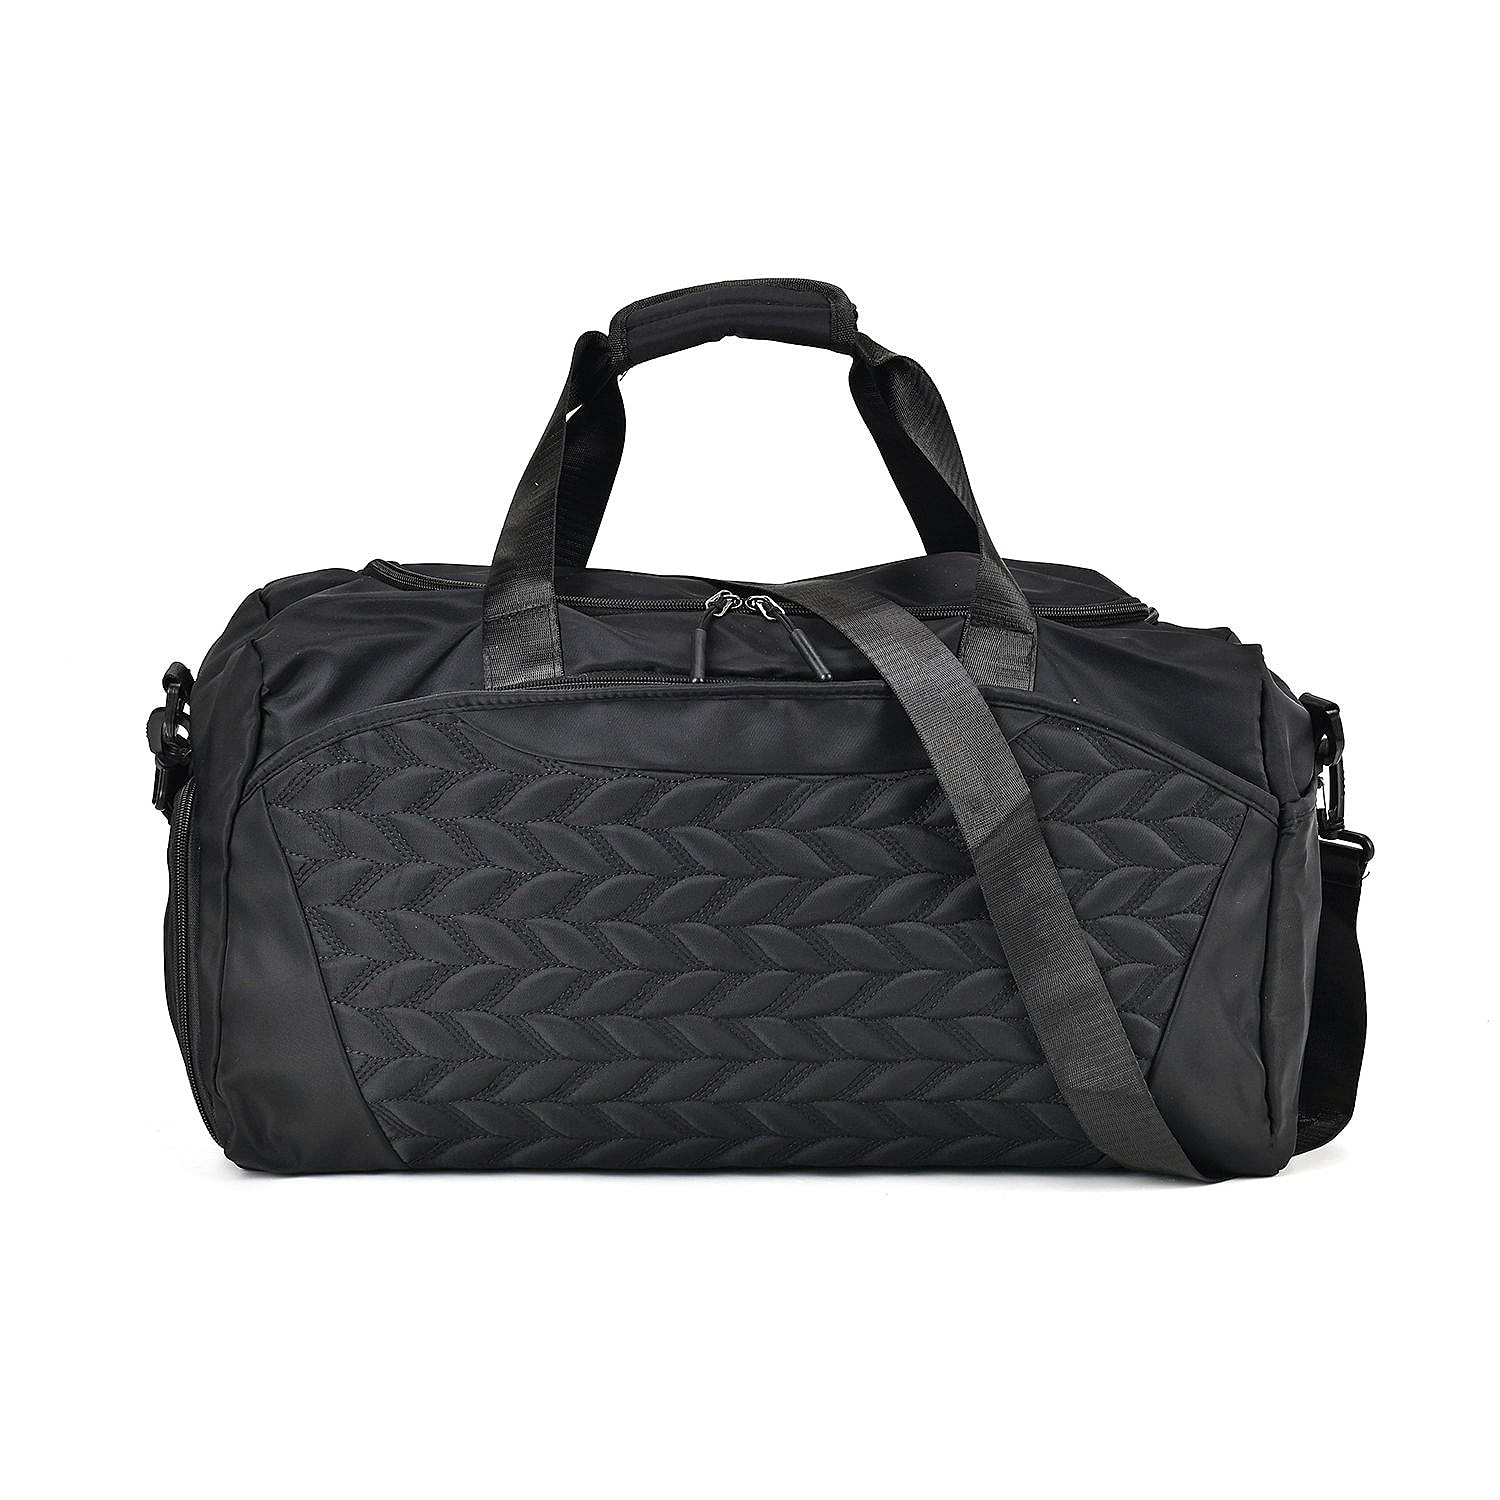 Travel-Duffle-Bag-with-Quilted-Leaves-Pattern-Black